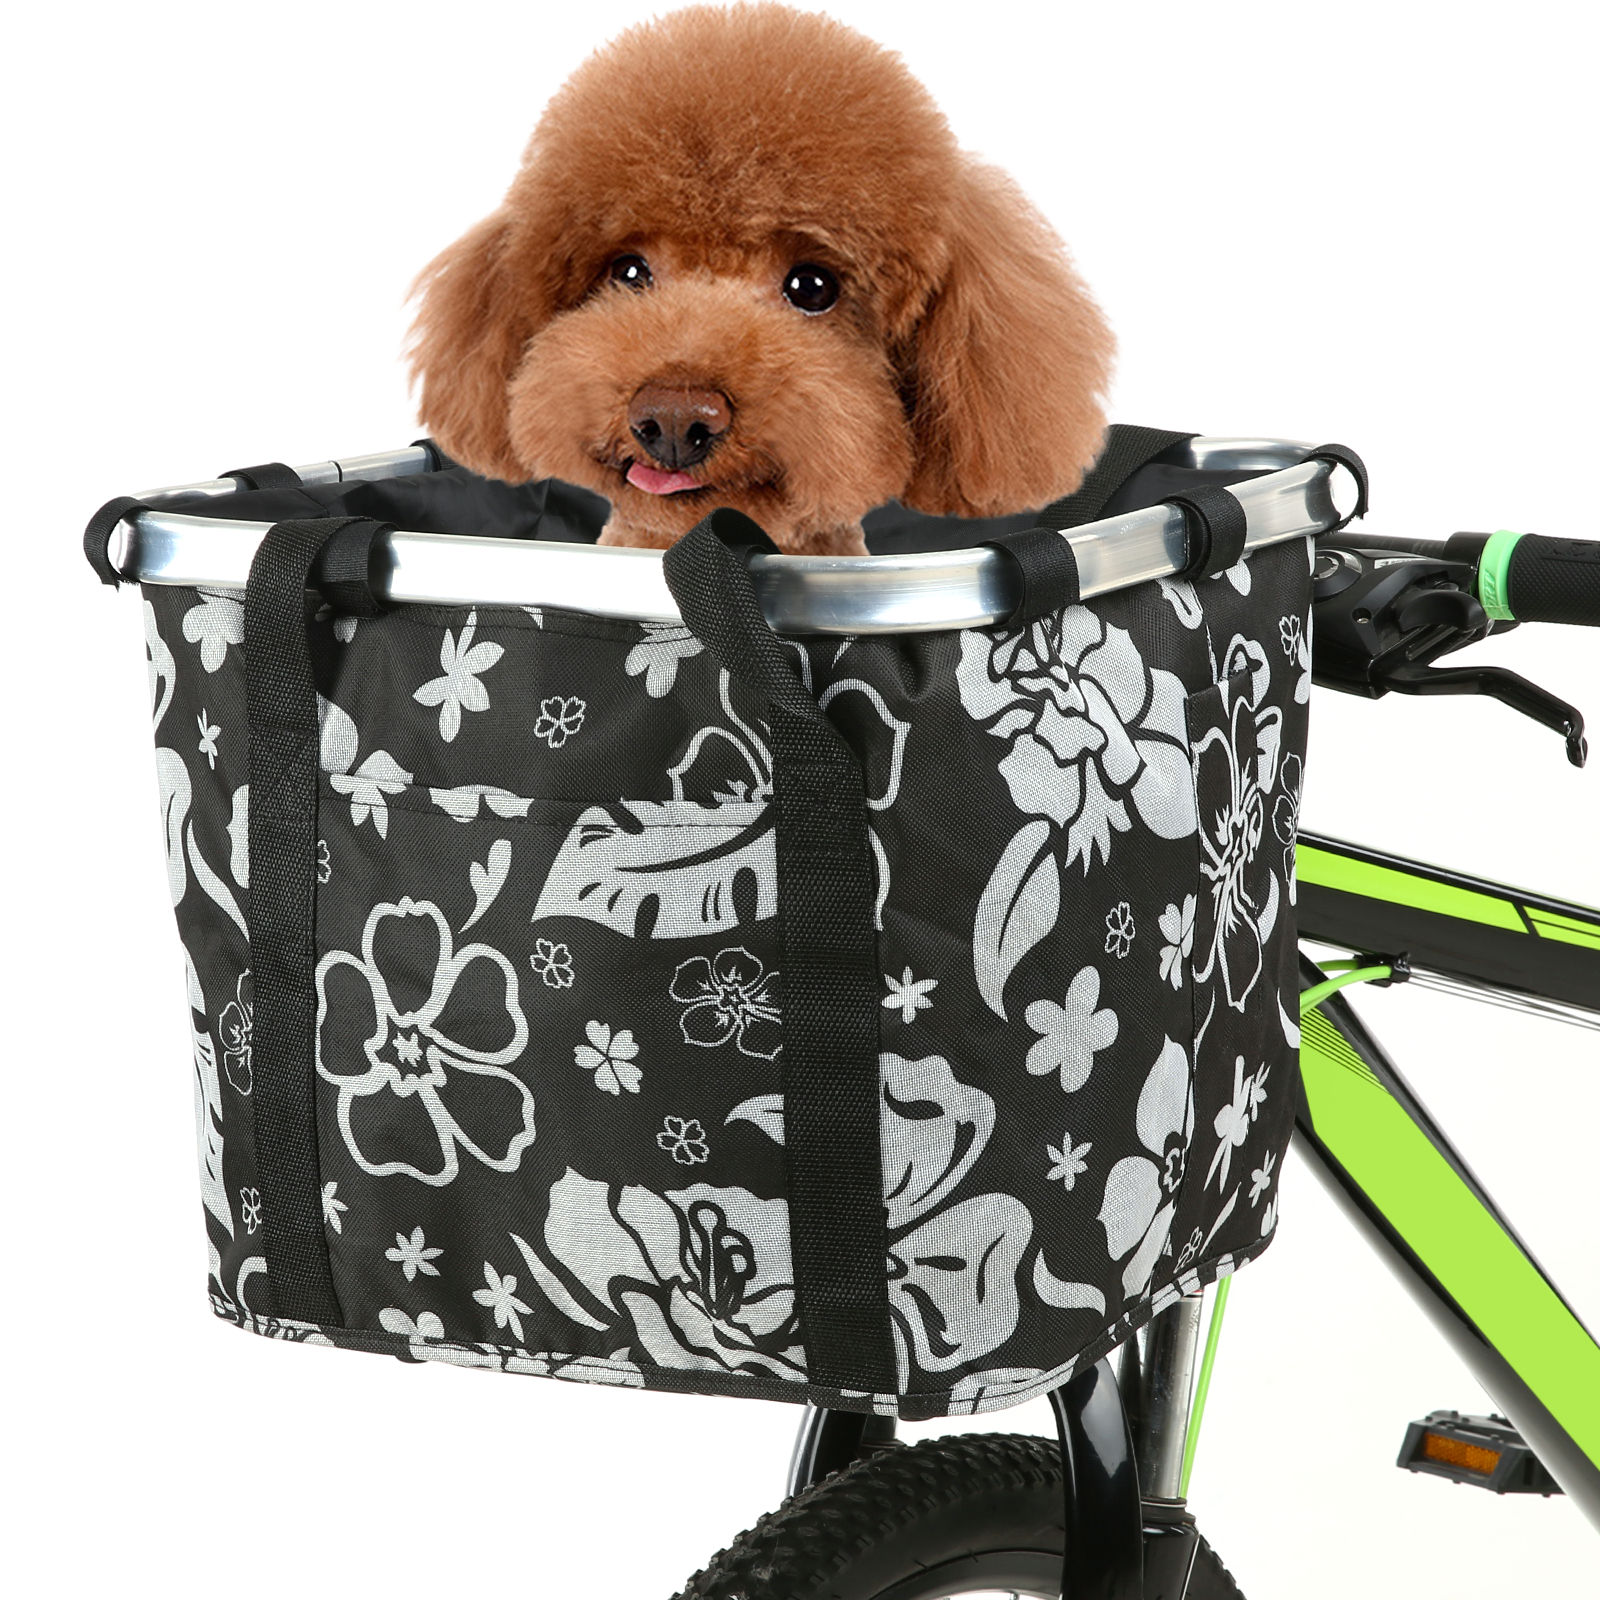 10KG Load Bicycle Basket Pouch Bike Bags Bicycle Front Bag Pet Carrier Cycling - Bicycle bag - 1